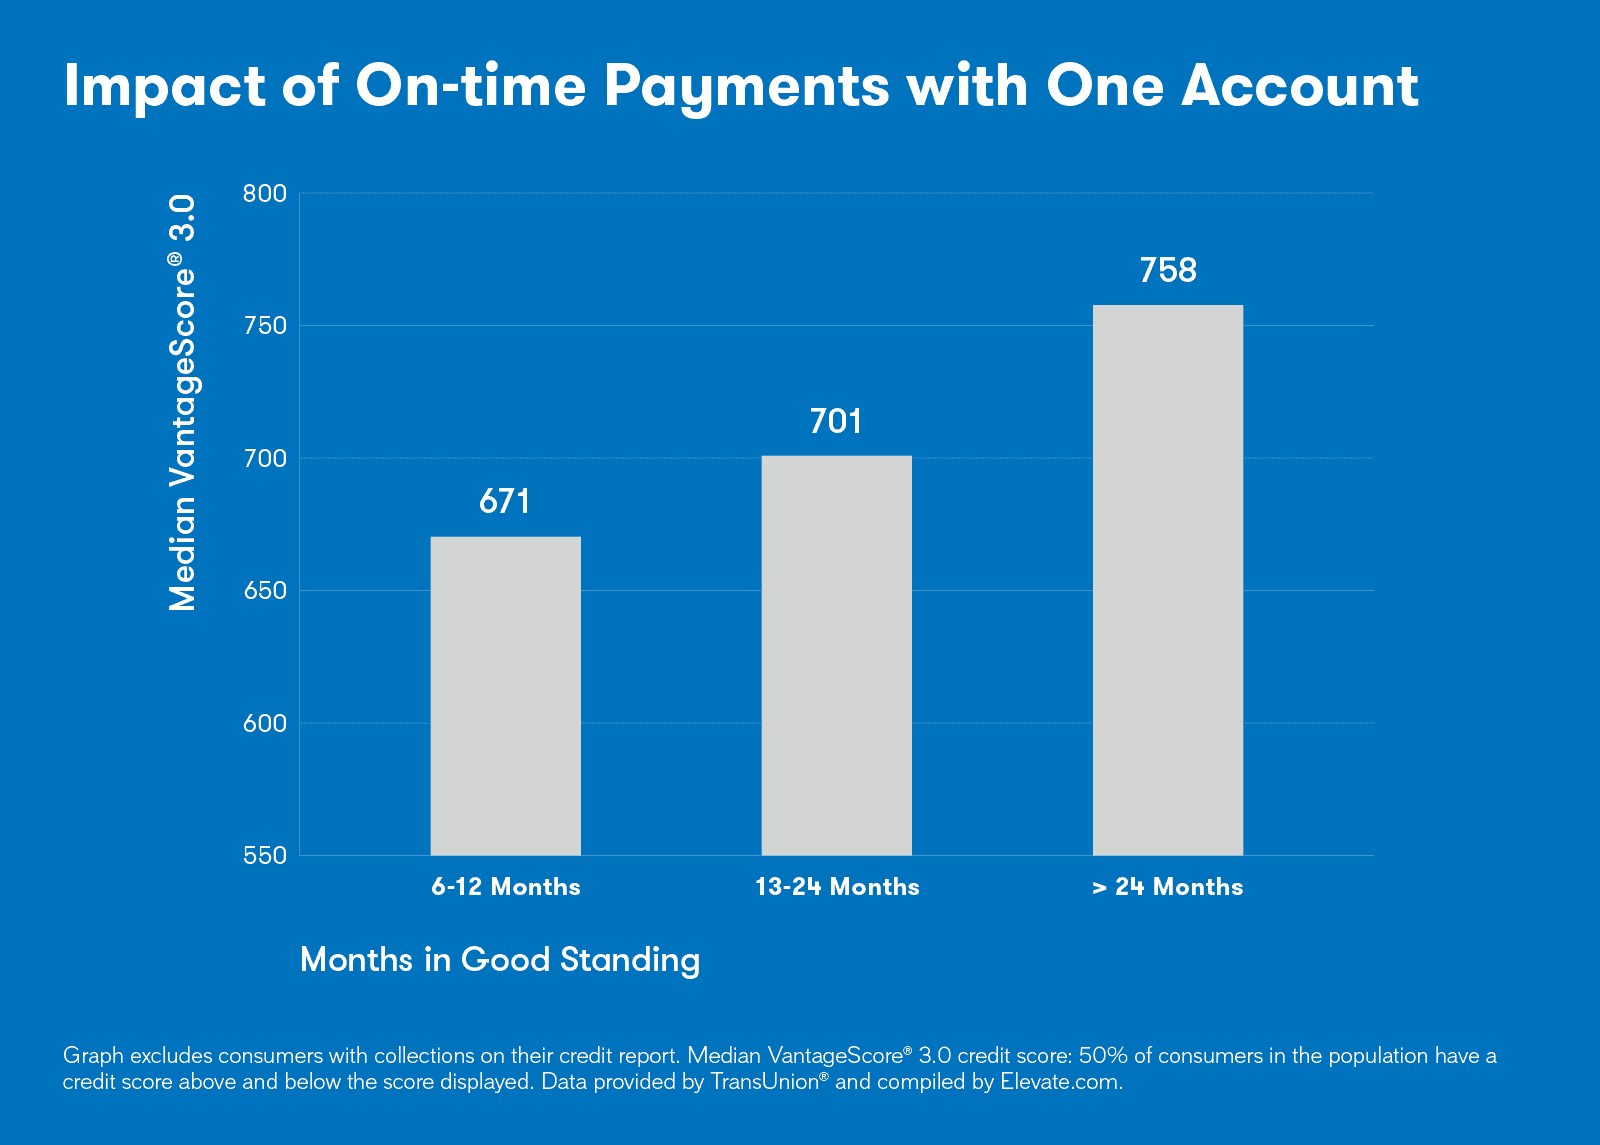 Chart showing showing the impact of on-time payments for one account has on your credit score over time.